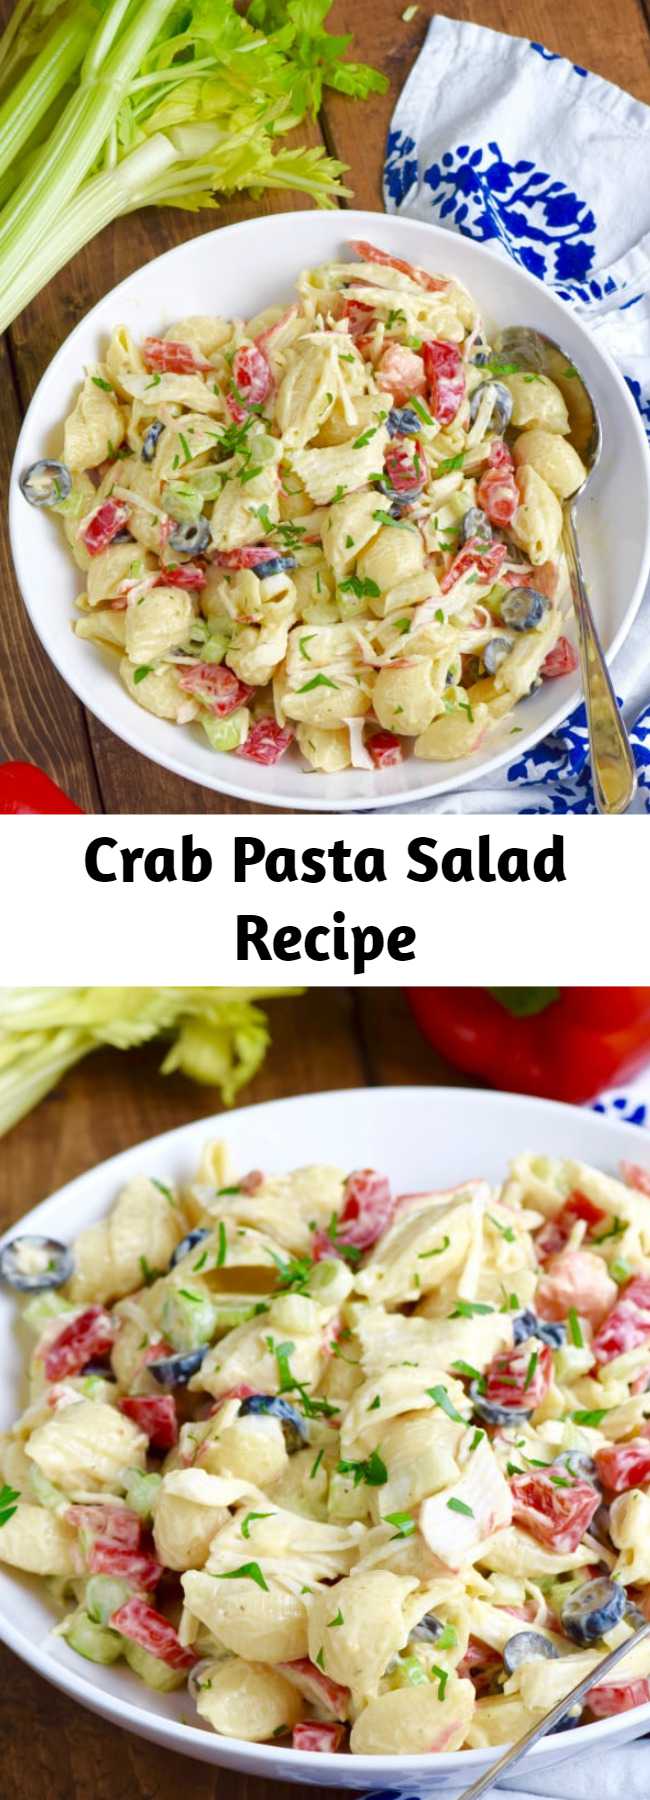 Crab Pasta Salad Recipe - This Crab Pasta Salad is a family recipe, one of my favorites!  Packed with veggies and delicious flavor, it's a staple at summer BBQs!